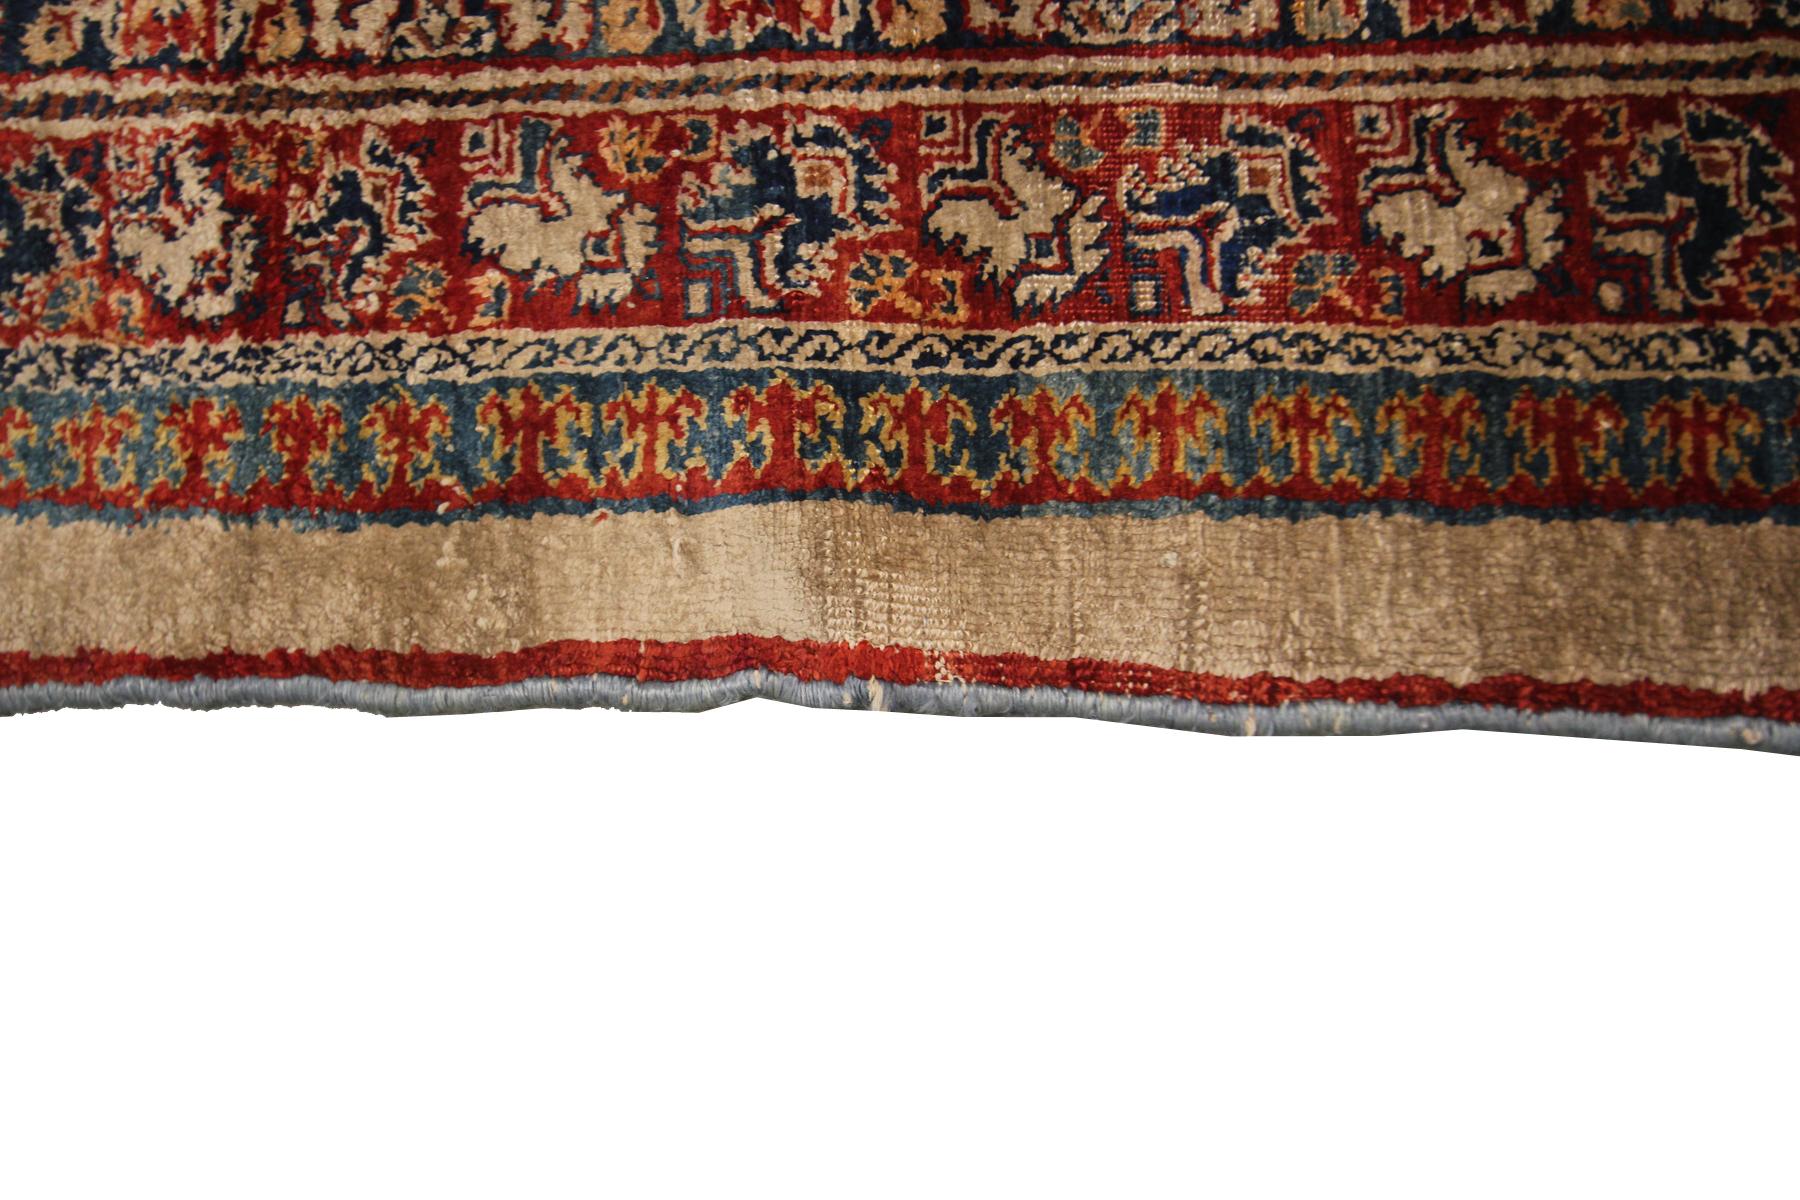 Hand-Knotted Mid 1800's Rare Antique Silk Heriz Rug Masterpiece 5x6 Tapestry 1860 For Sale